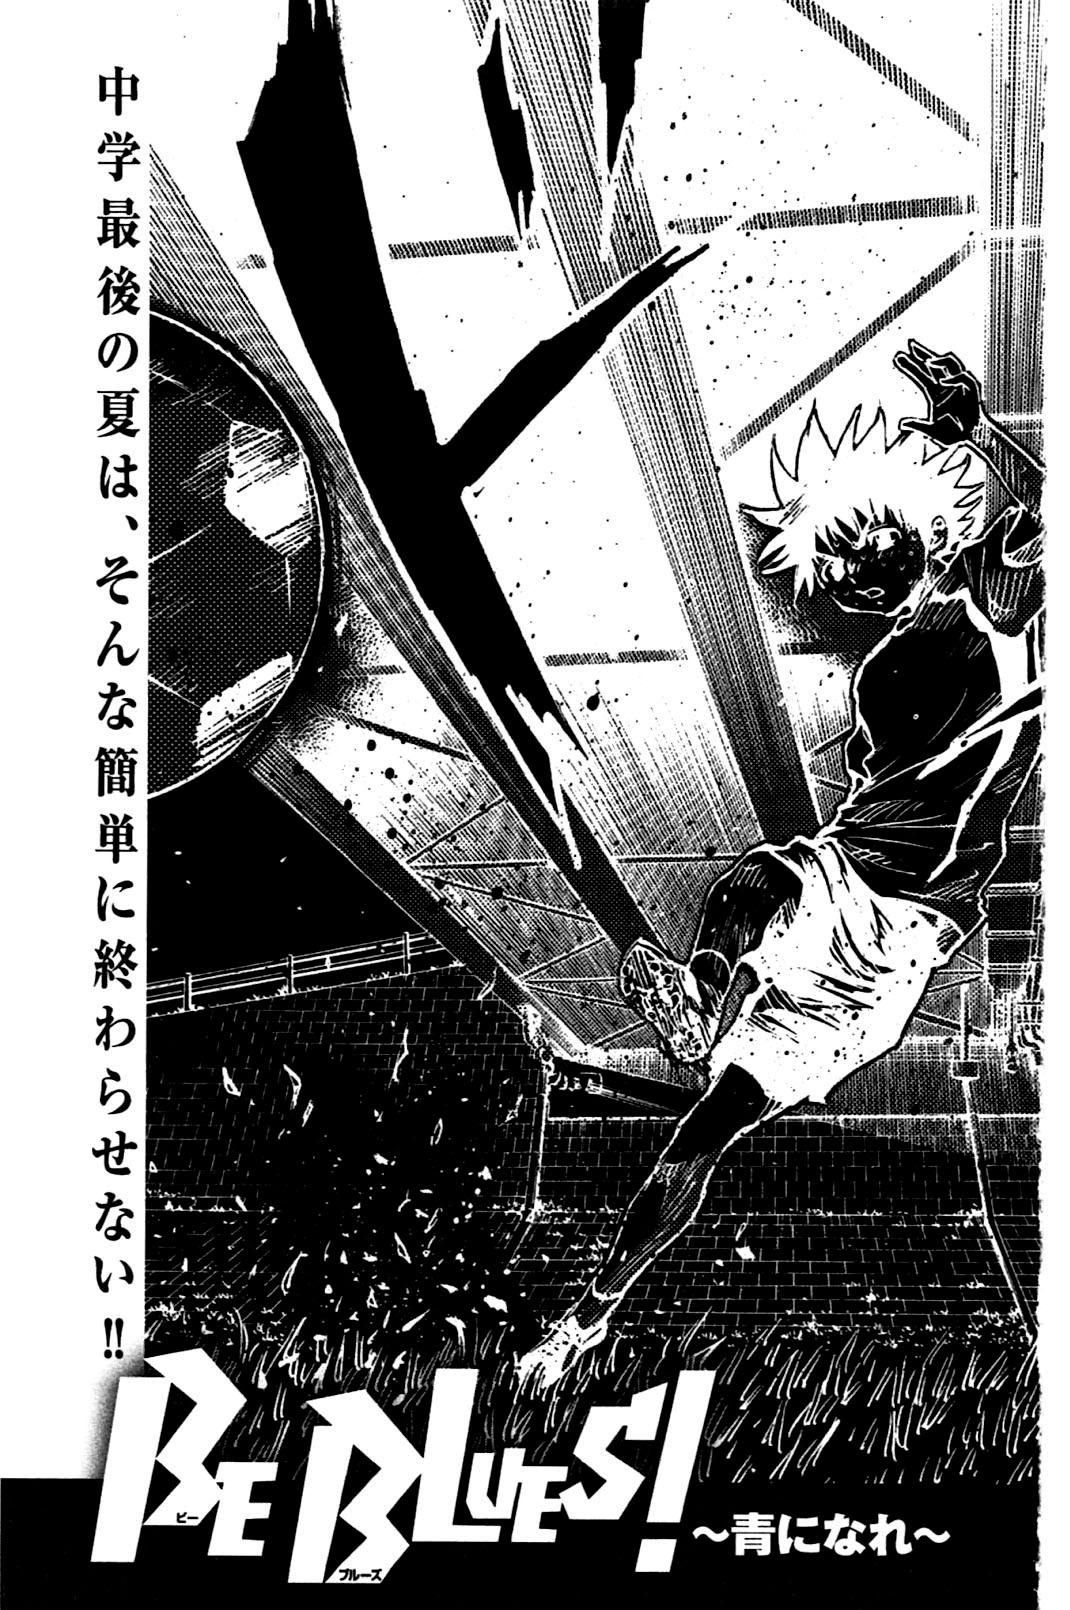 Fights Break Sphere Vol. 5 Ch. 47 The sound of the heart